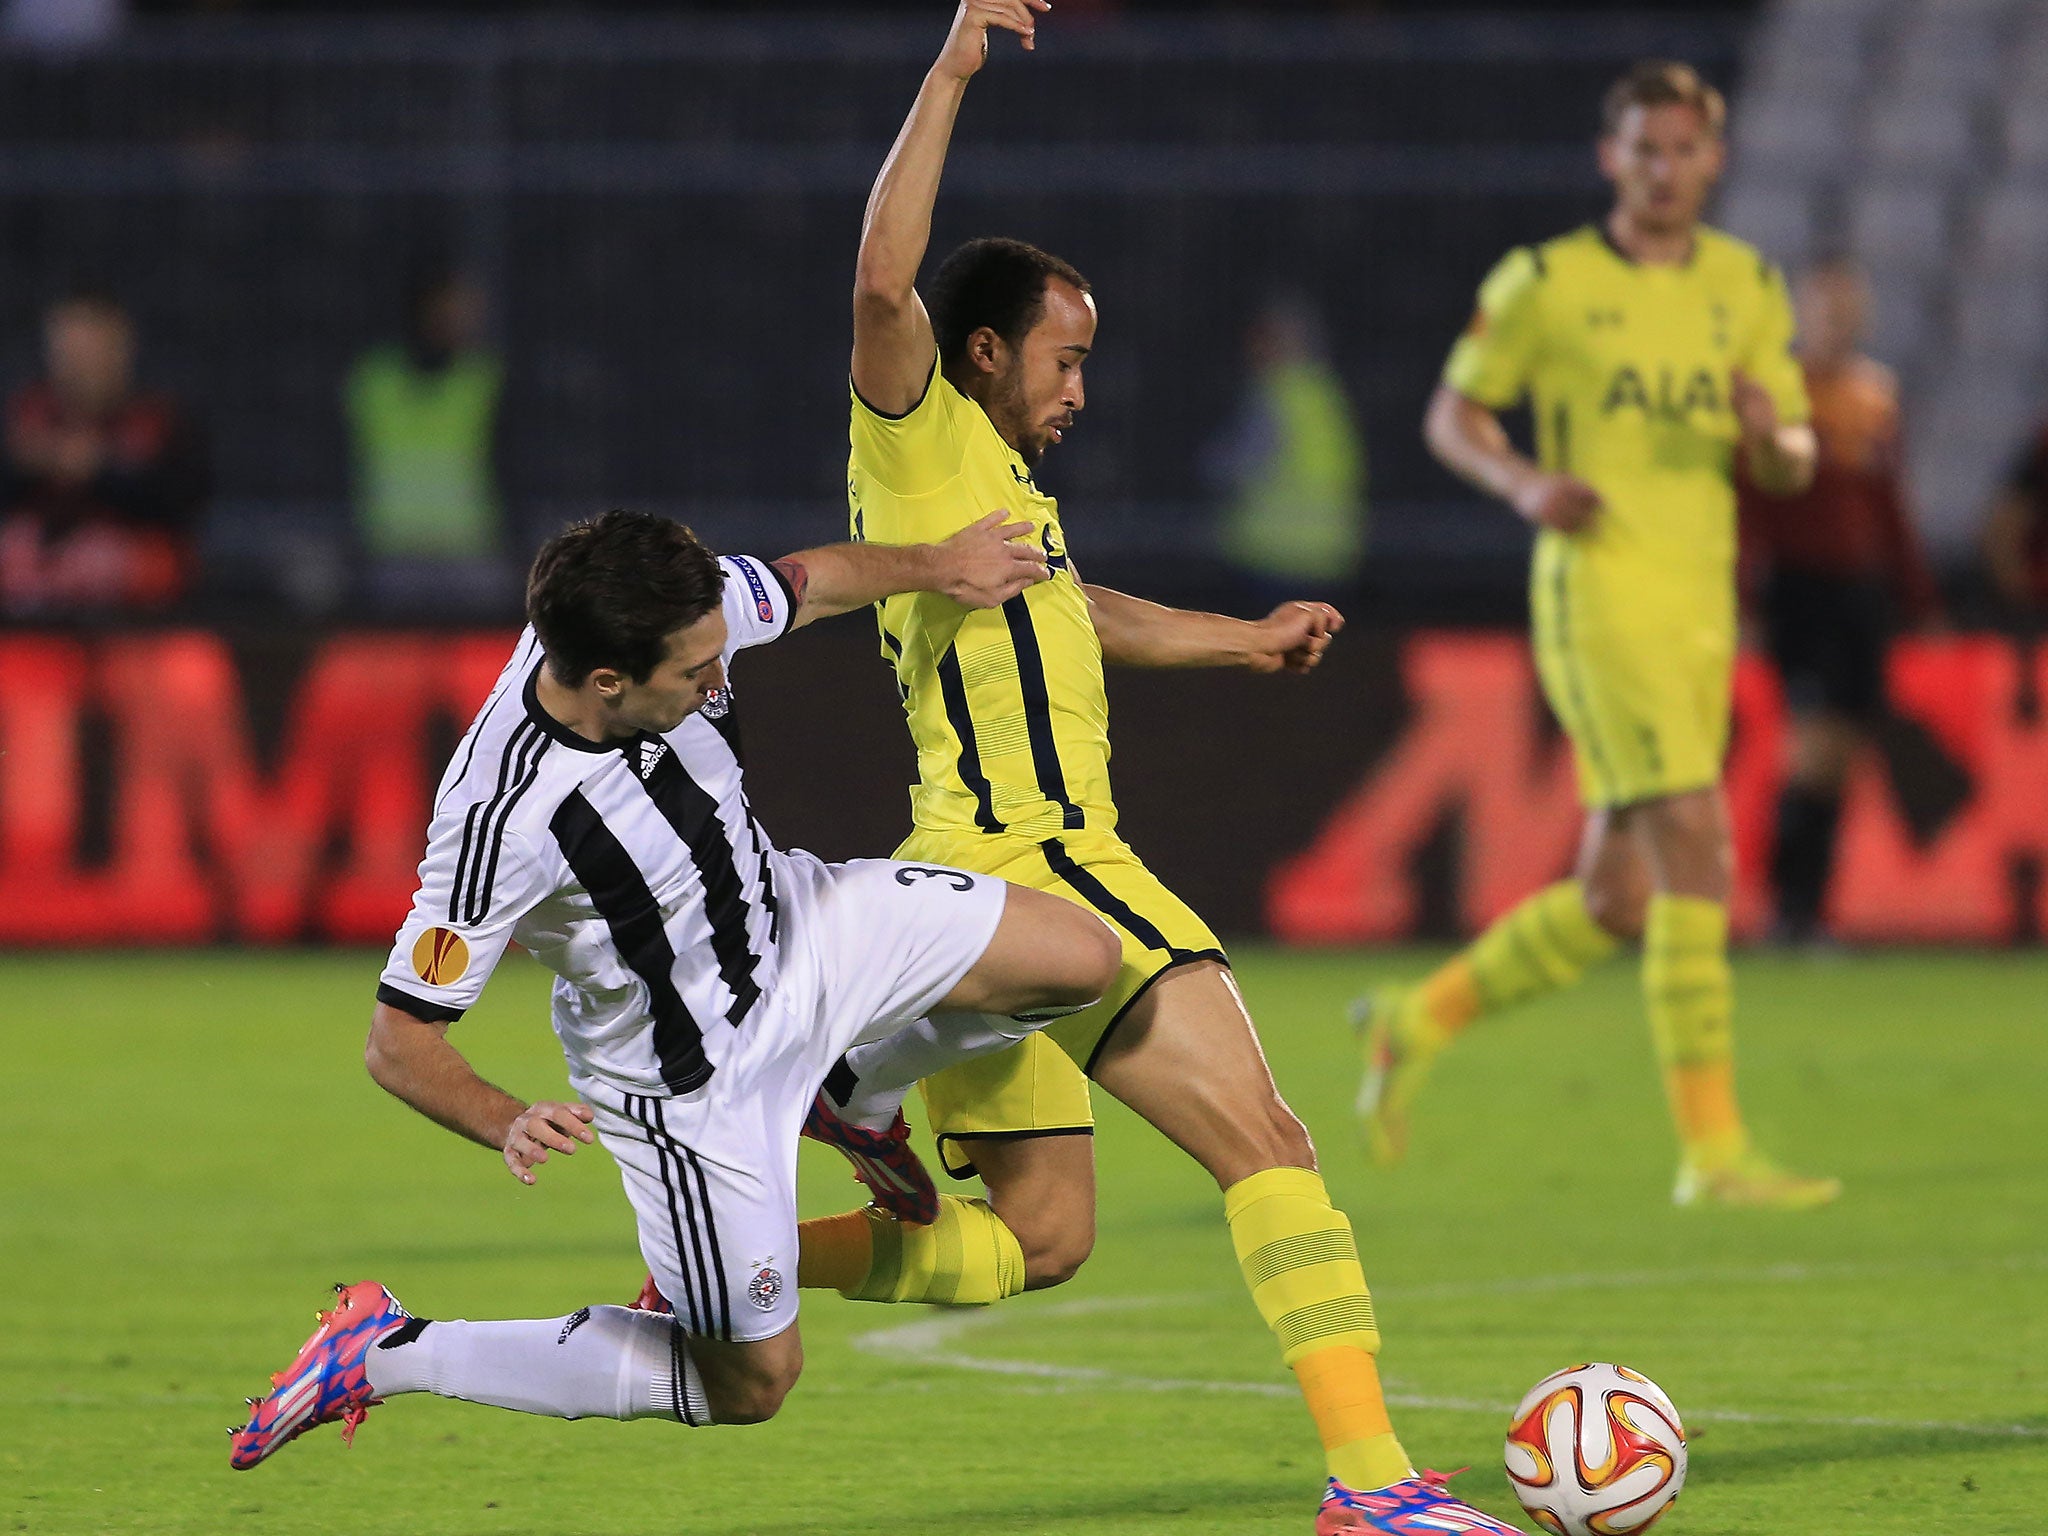 Andros Townsend is challenged by Vladimir Volkov